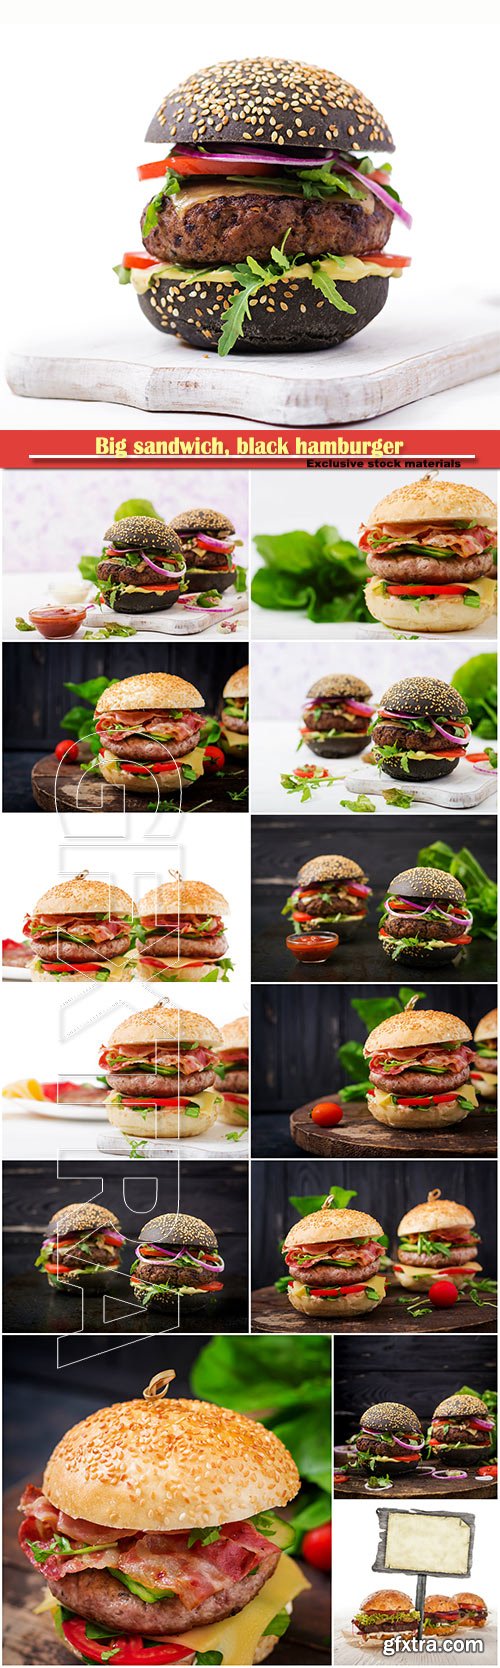 Big sandwich, black hamburger with juicy beef burger, cheese, tomato, and red onion on black background